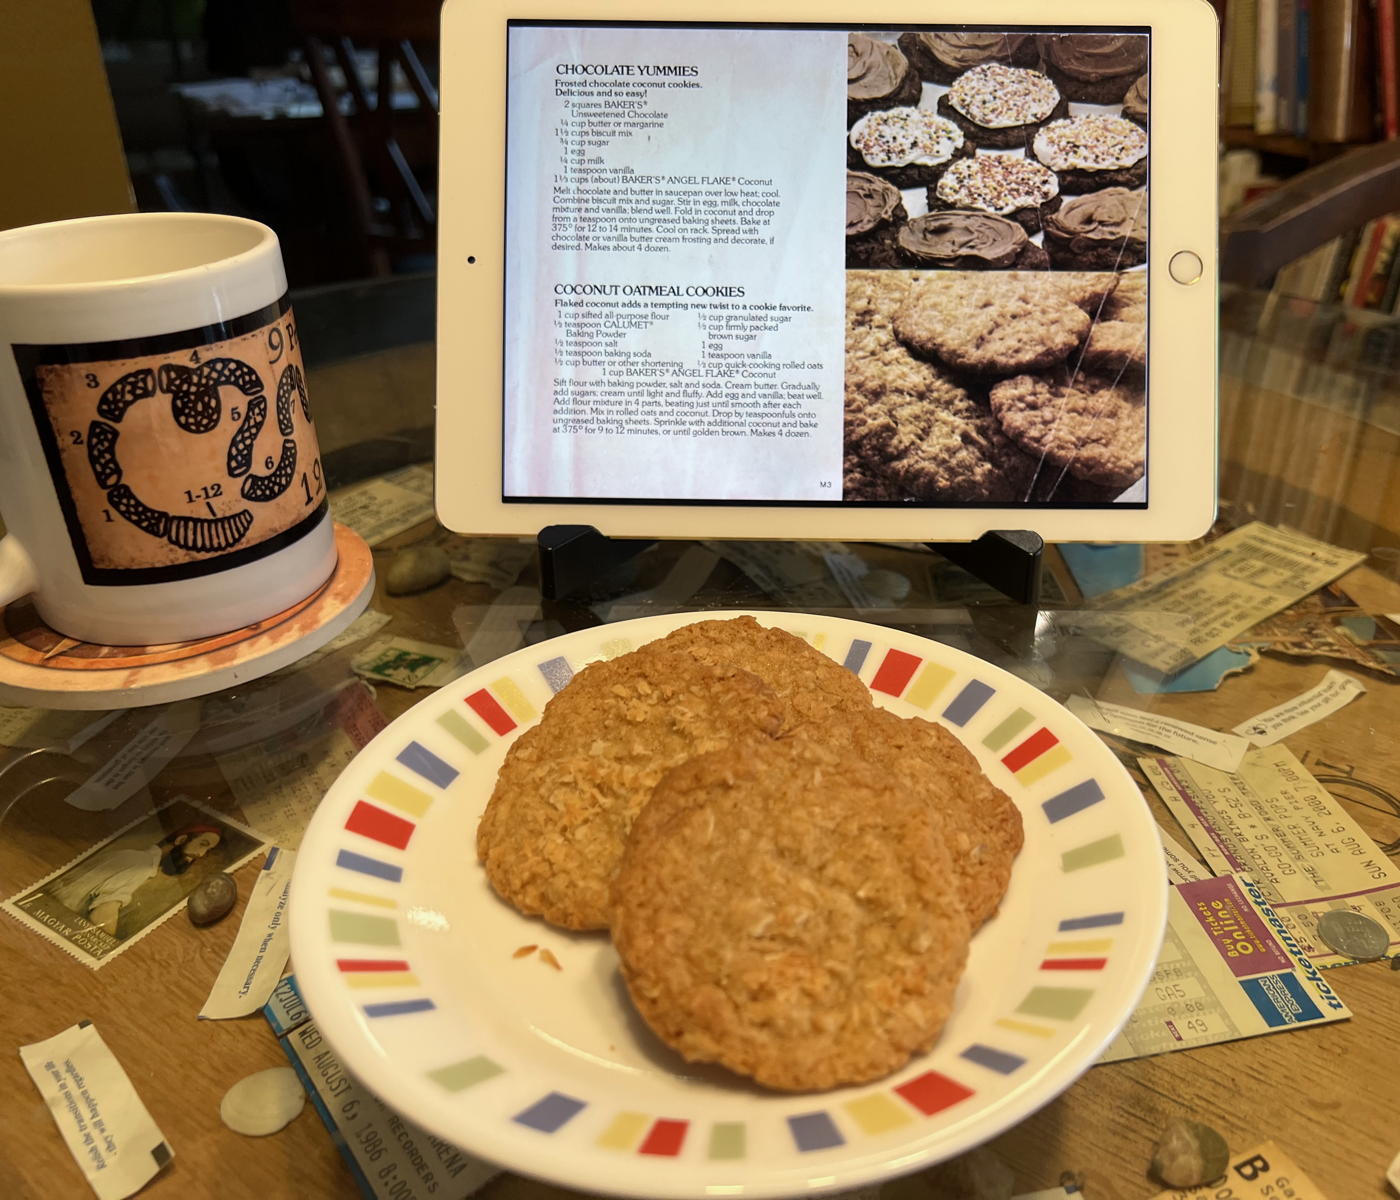 Coconut Oatmeal Cookies with recipe